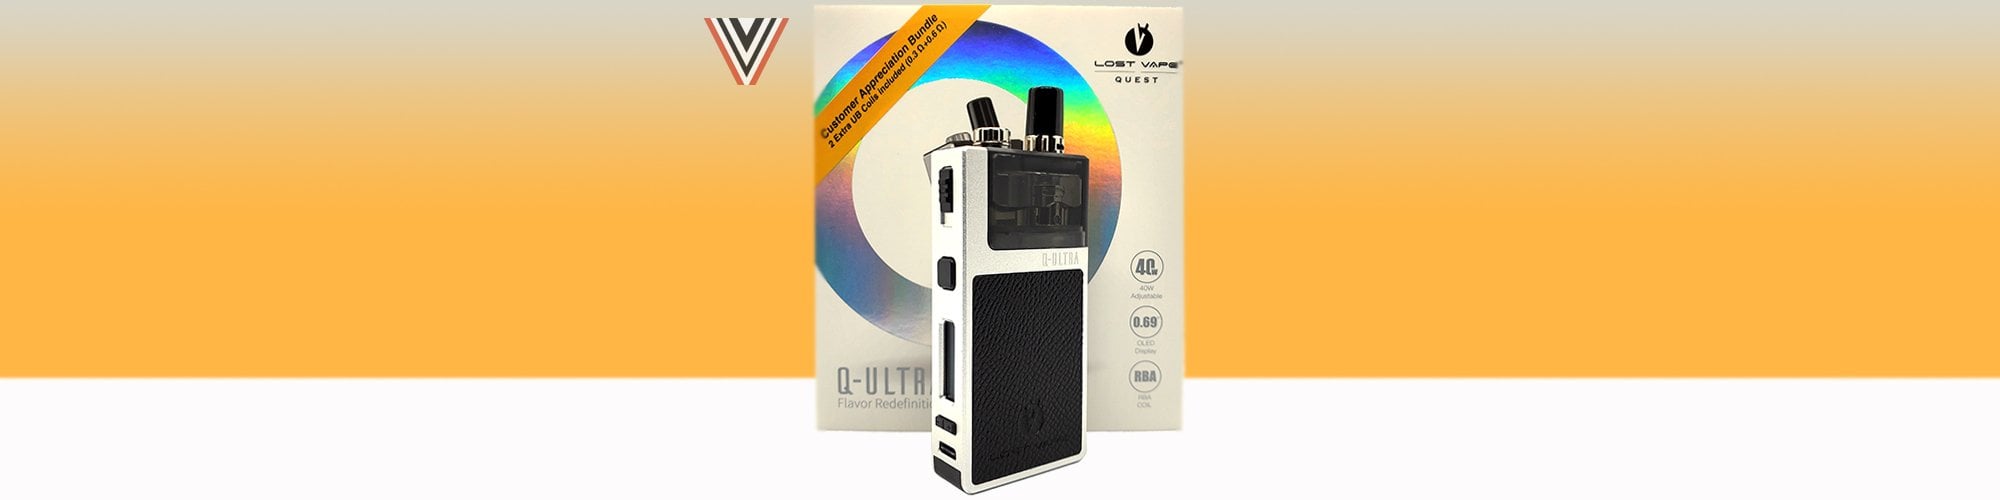 Lost Vape Q-Ultra Review - Main Banner